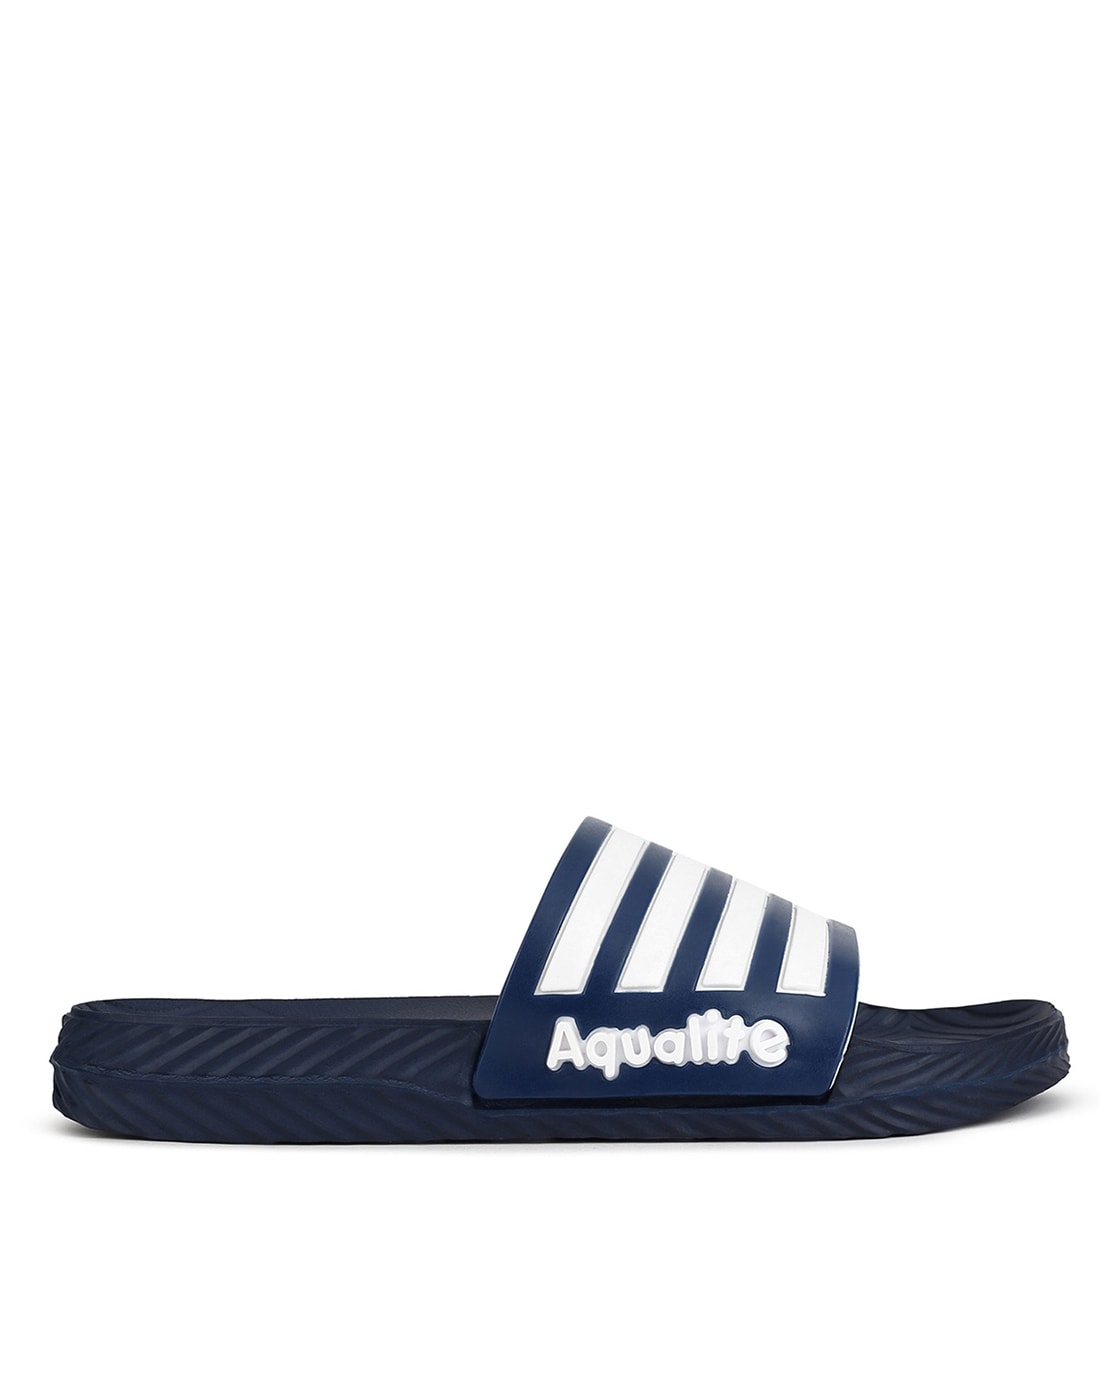 Aqualite Women's Navy Blue Slippers : Amazon.in: Fashion